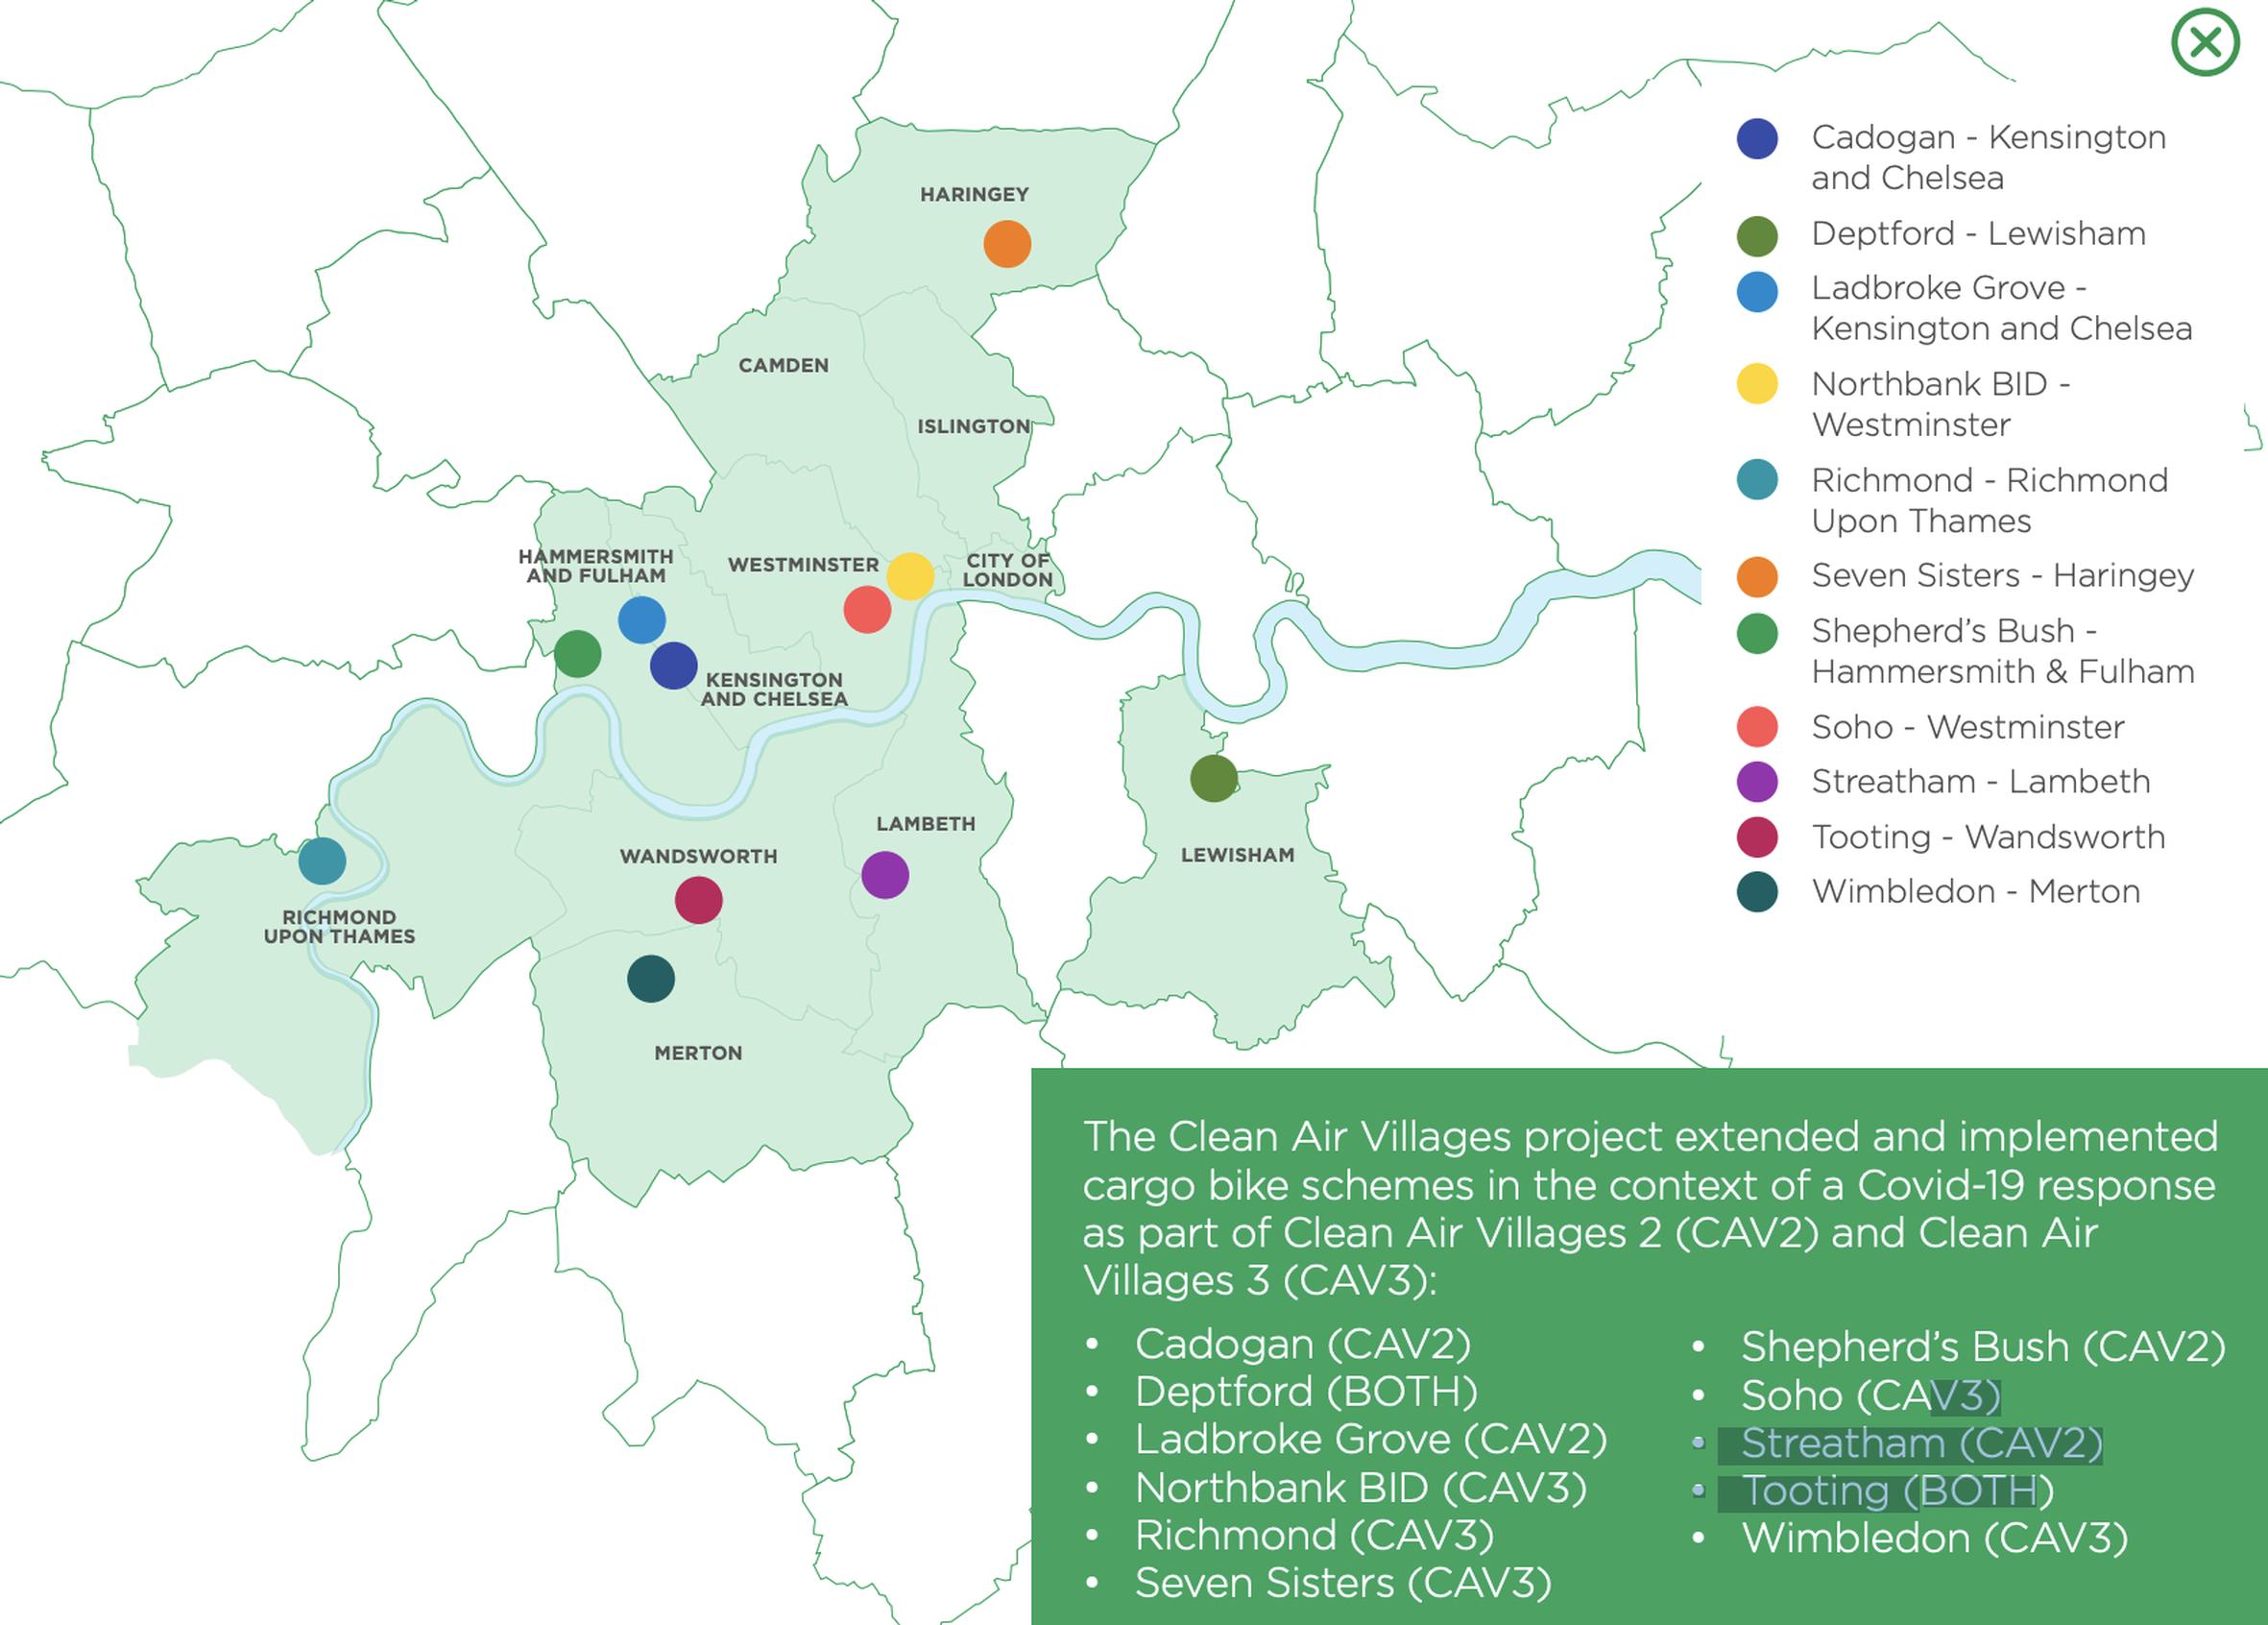 Map of the Clean Air Villages 4 (CAV4) projects across London (Cross River Partnership)